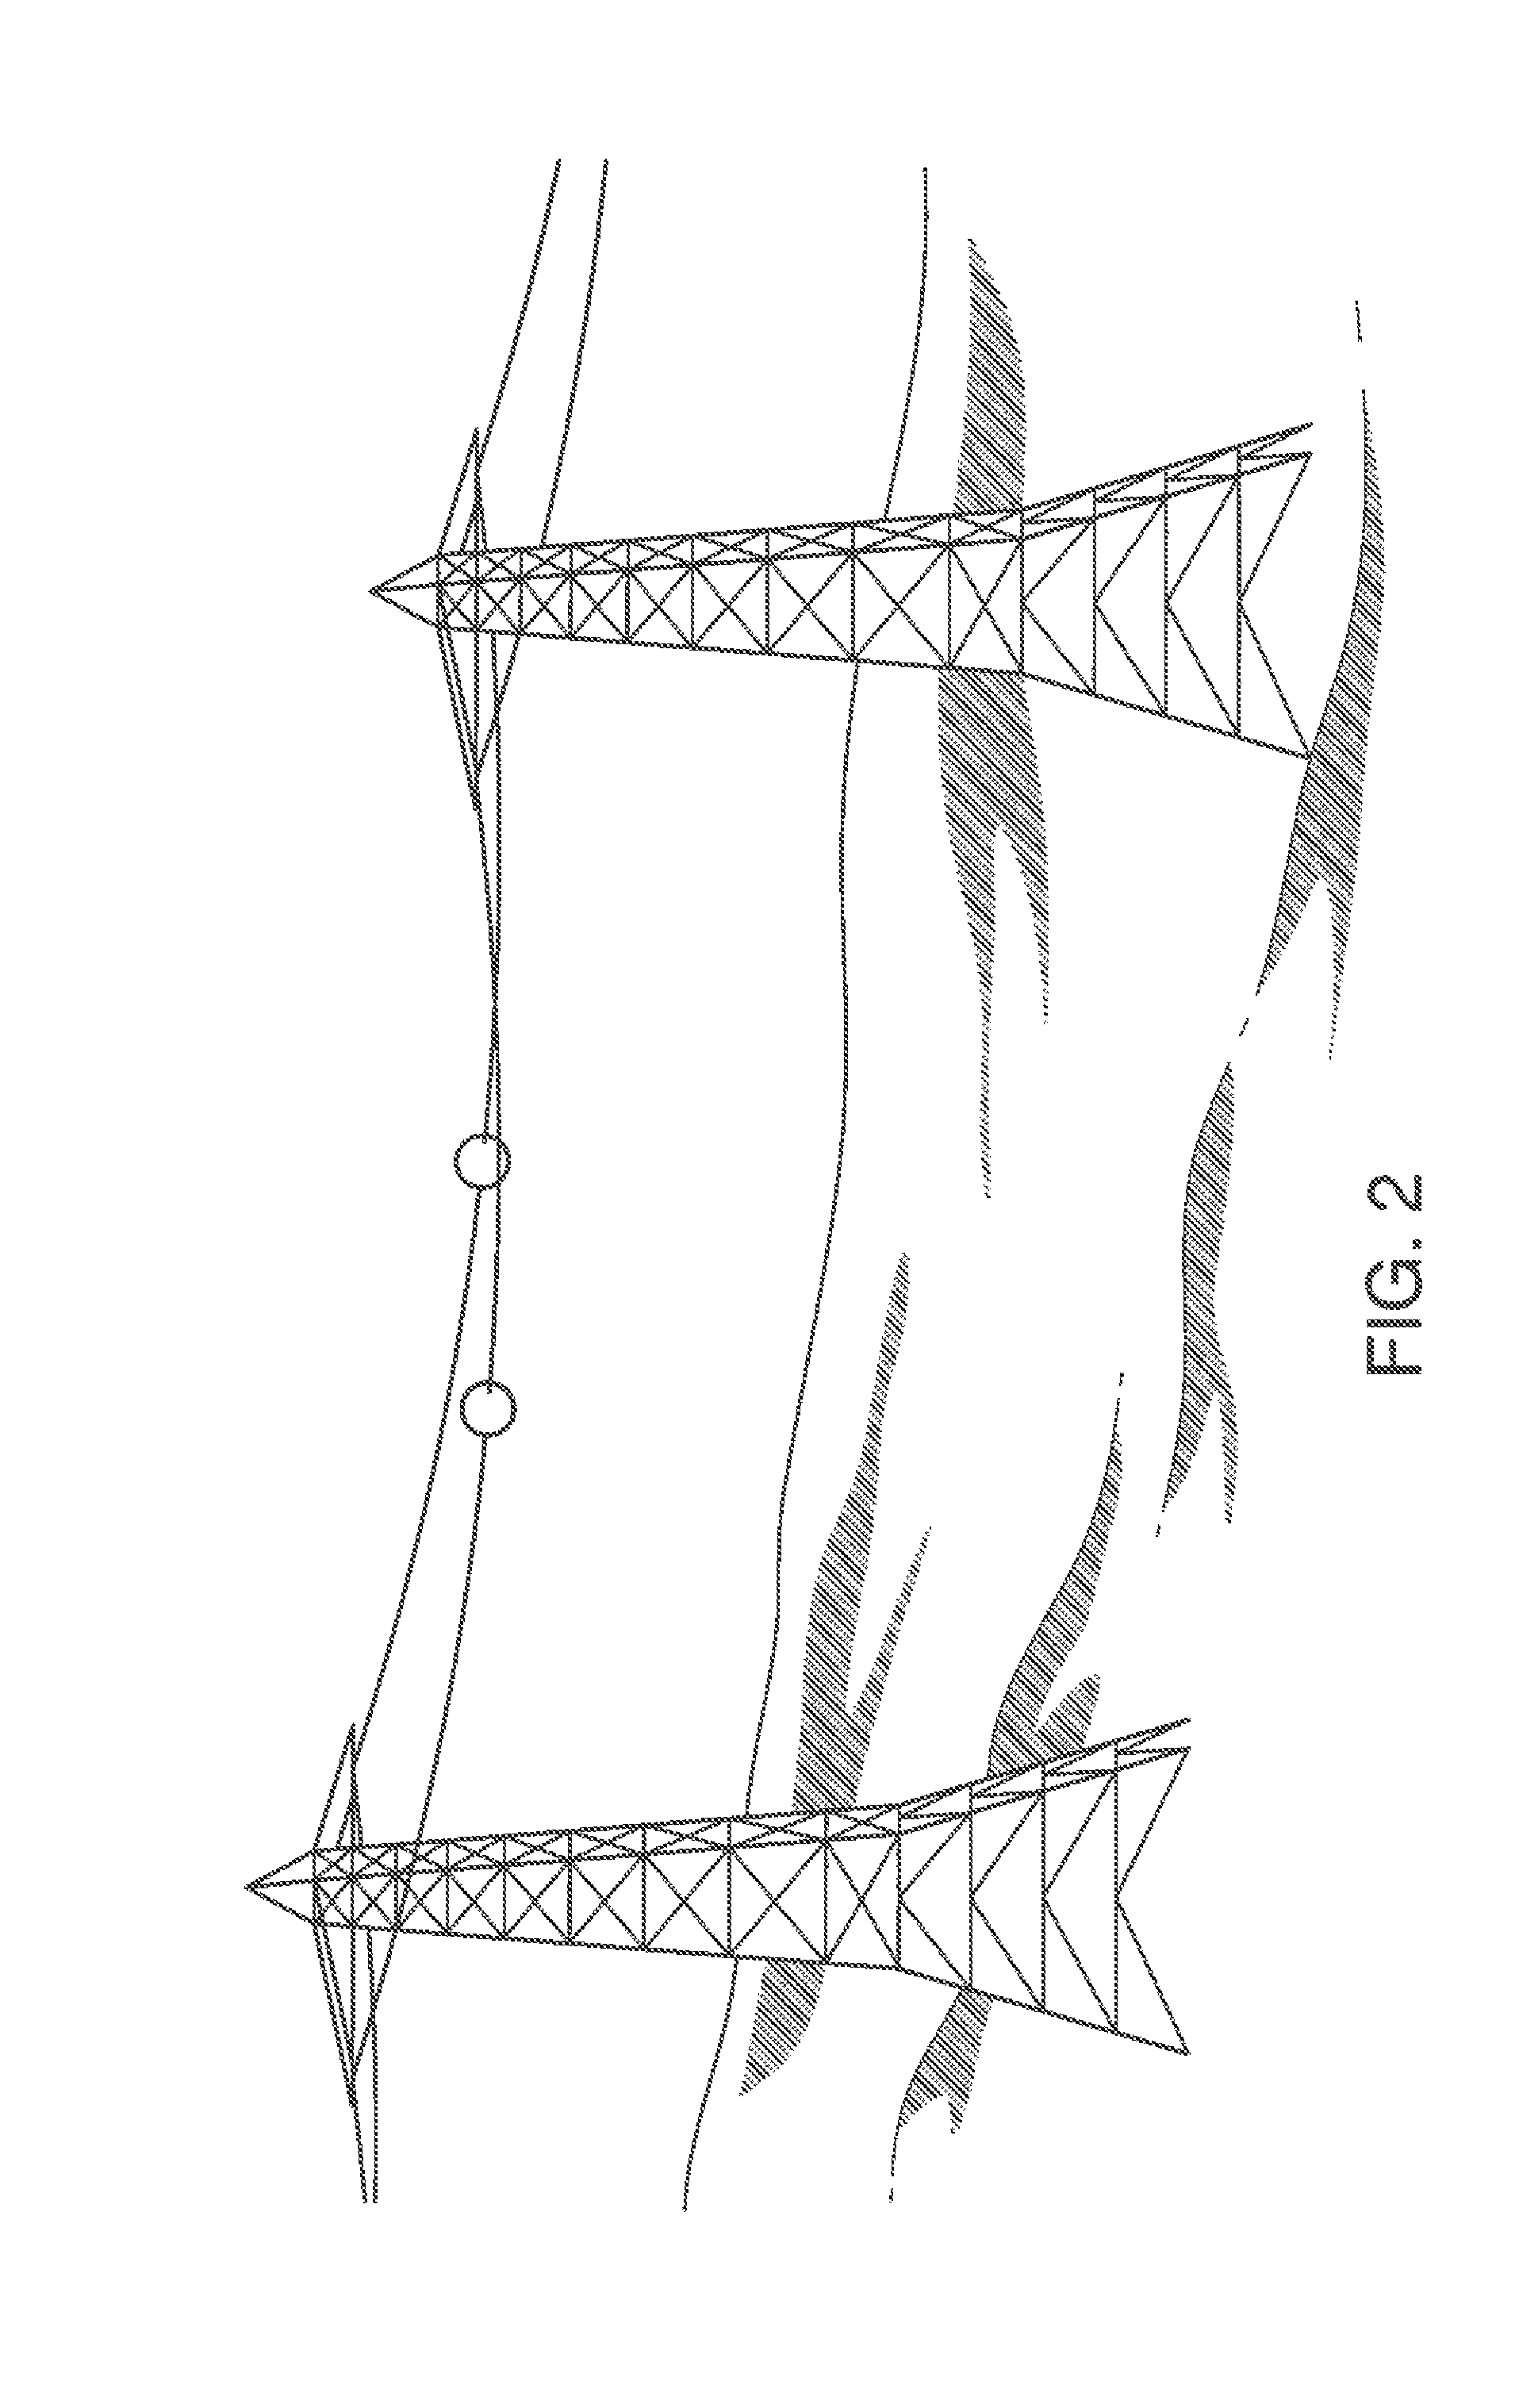 System and method to monitor powerlines